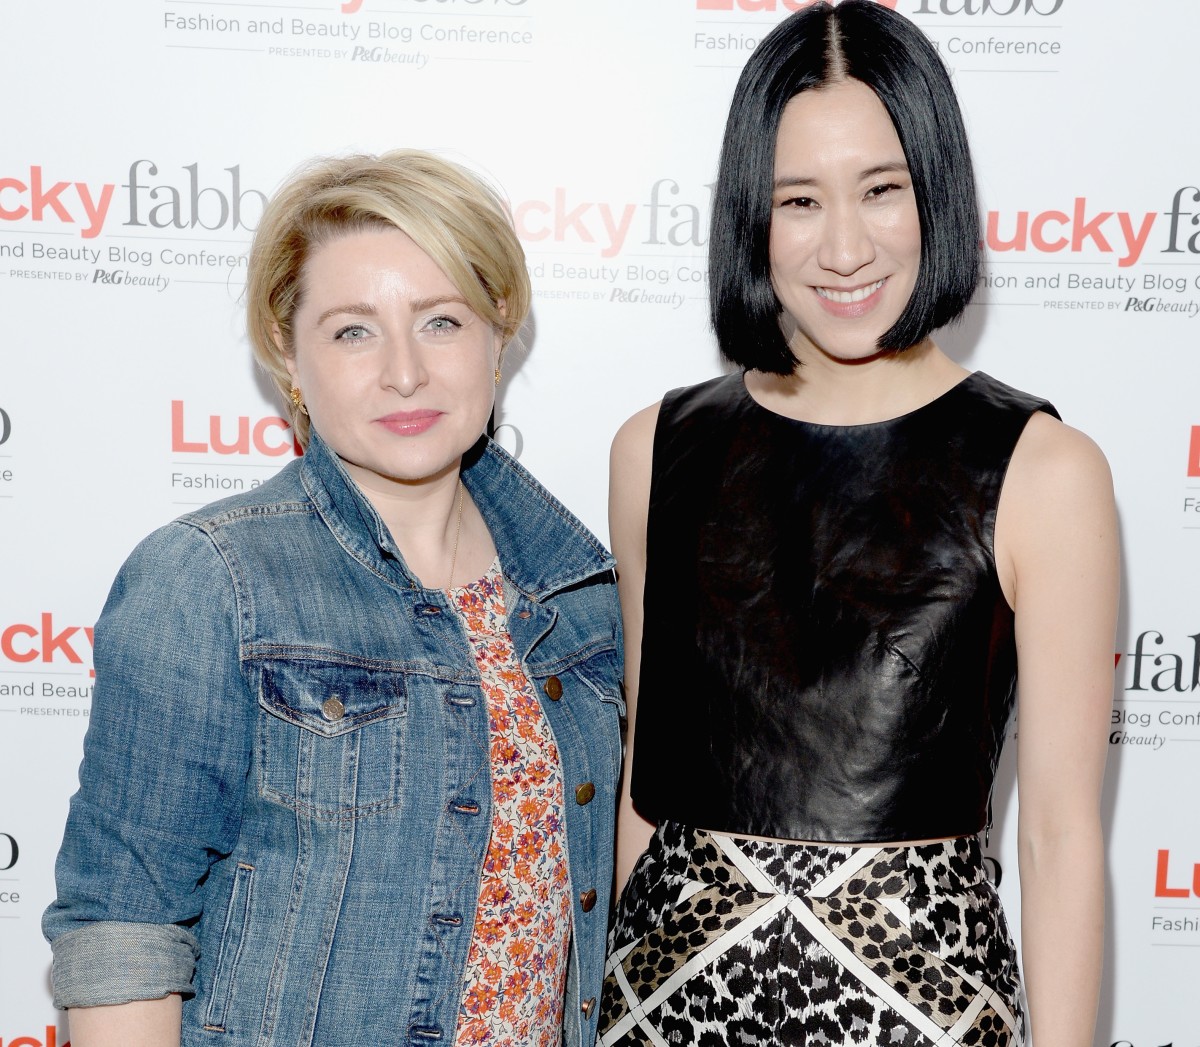 The Lucky Group President Gillian Gormand Round and Chief Creative Officer Eva Chen in April. Photo: Michael Kovac/Getty Images for Lucky